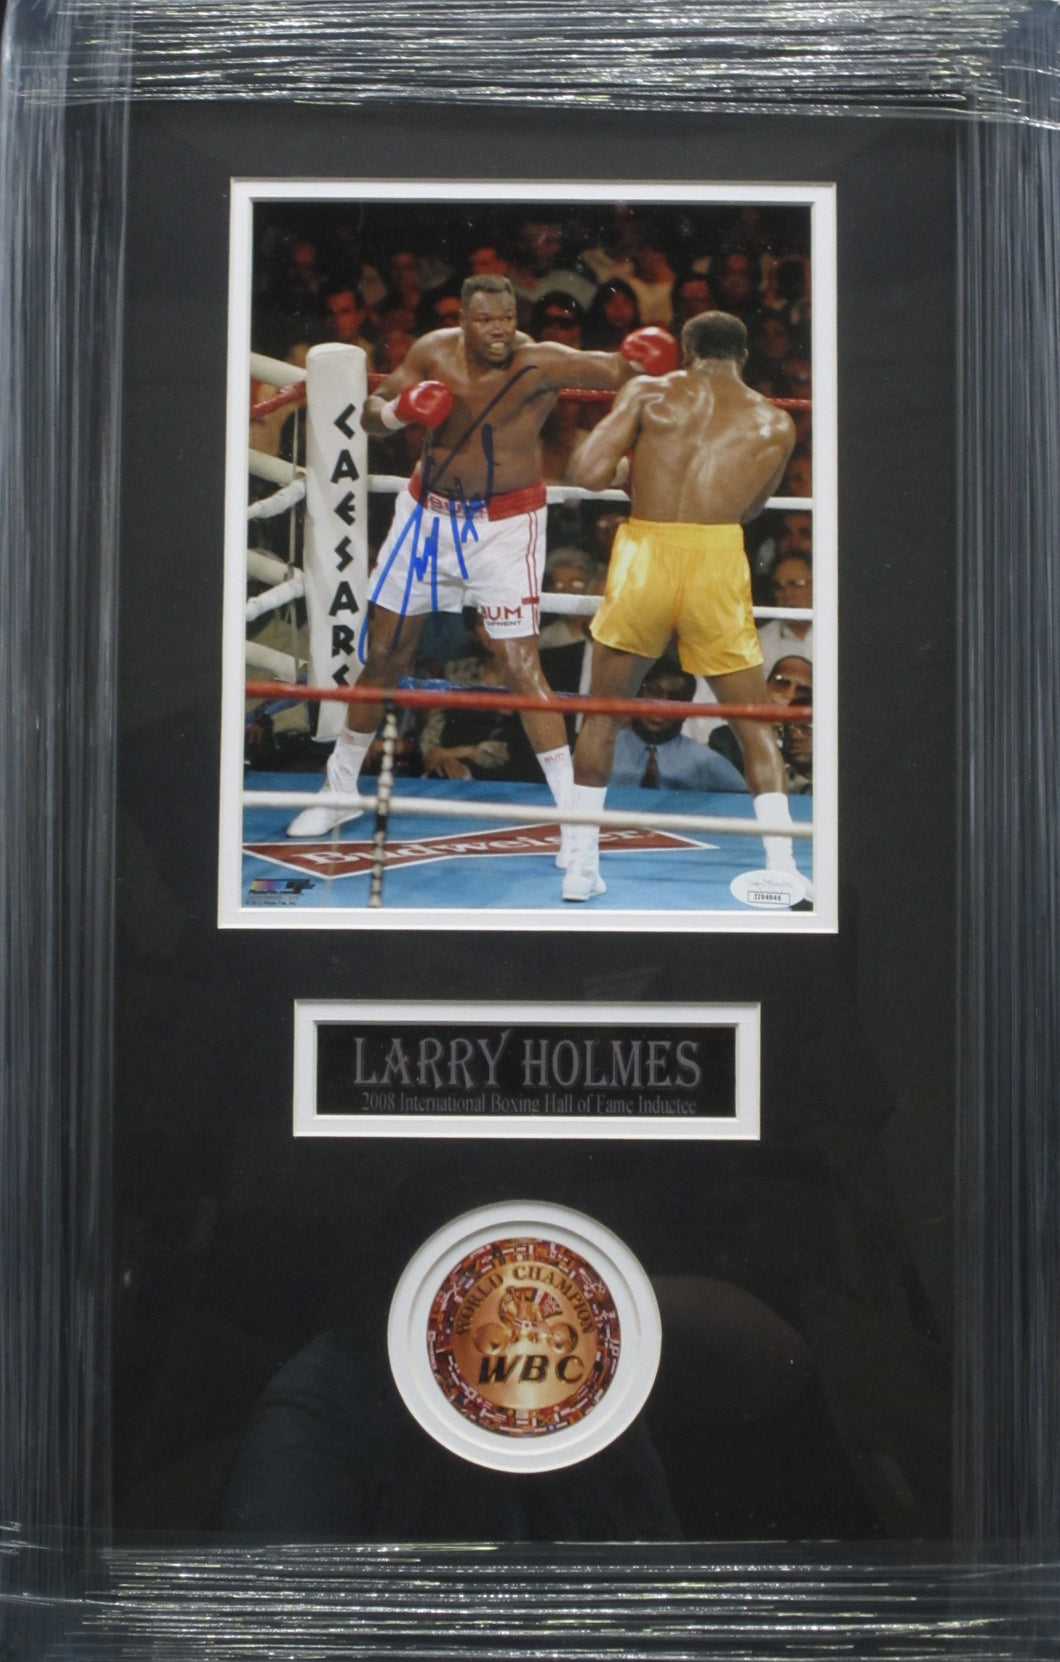 American Boxer Larry Holmes Signed 8x10 Photo Framed & Matted with JSA COA